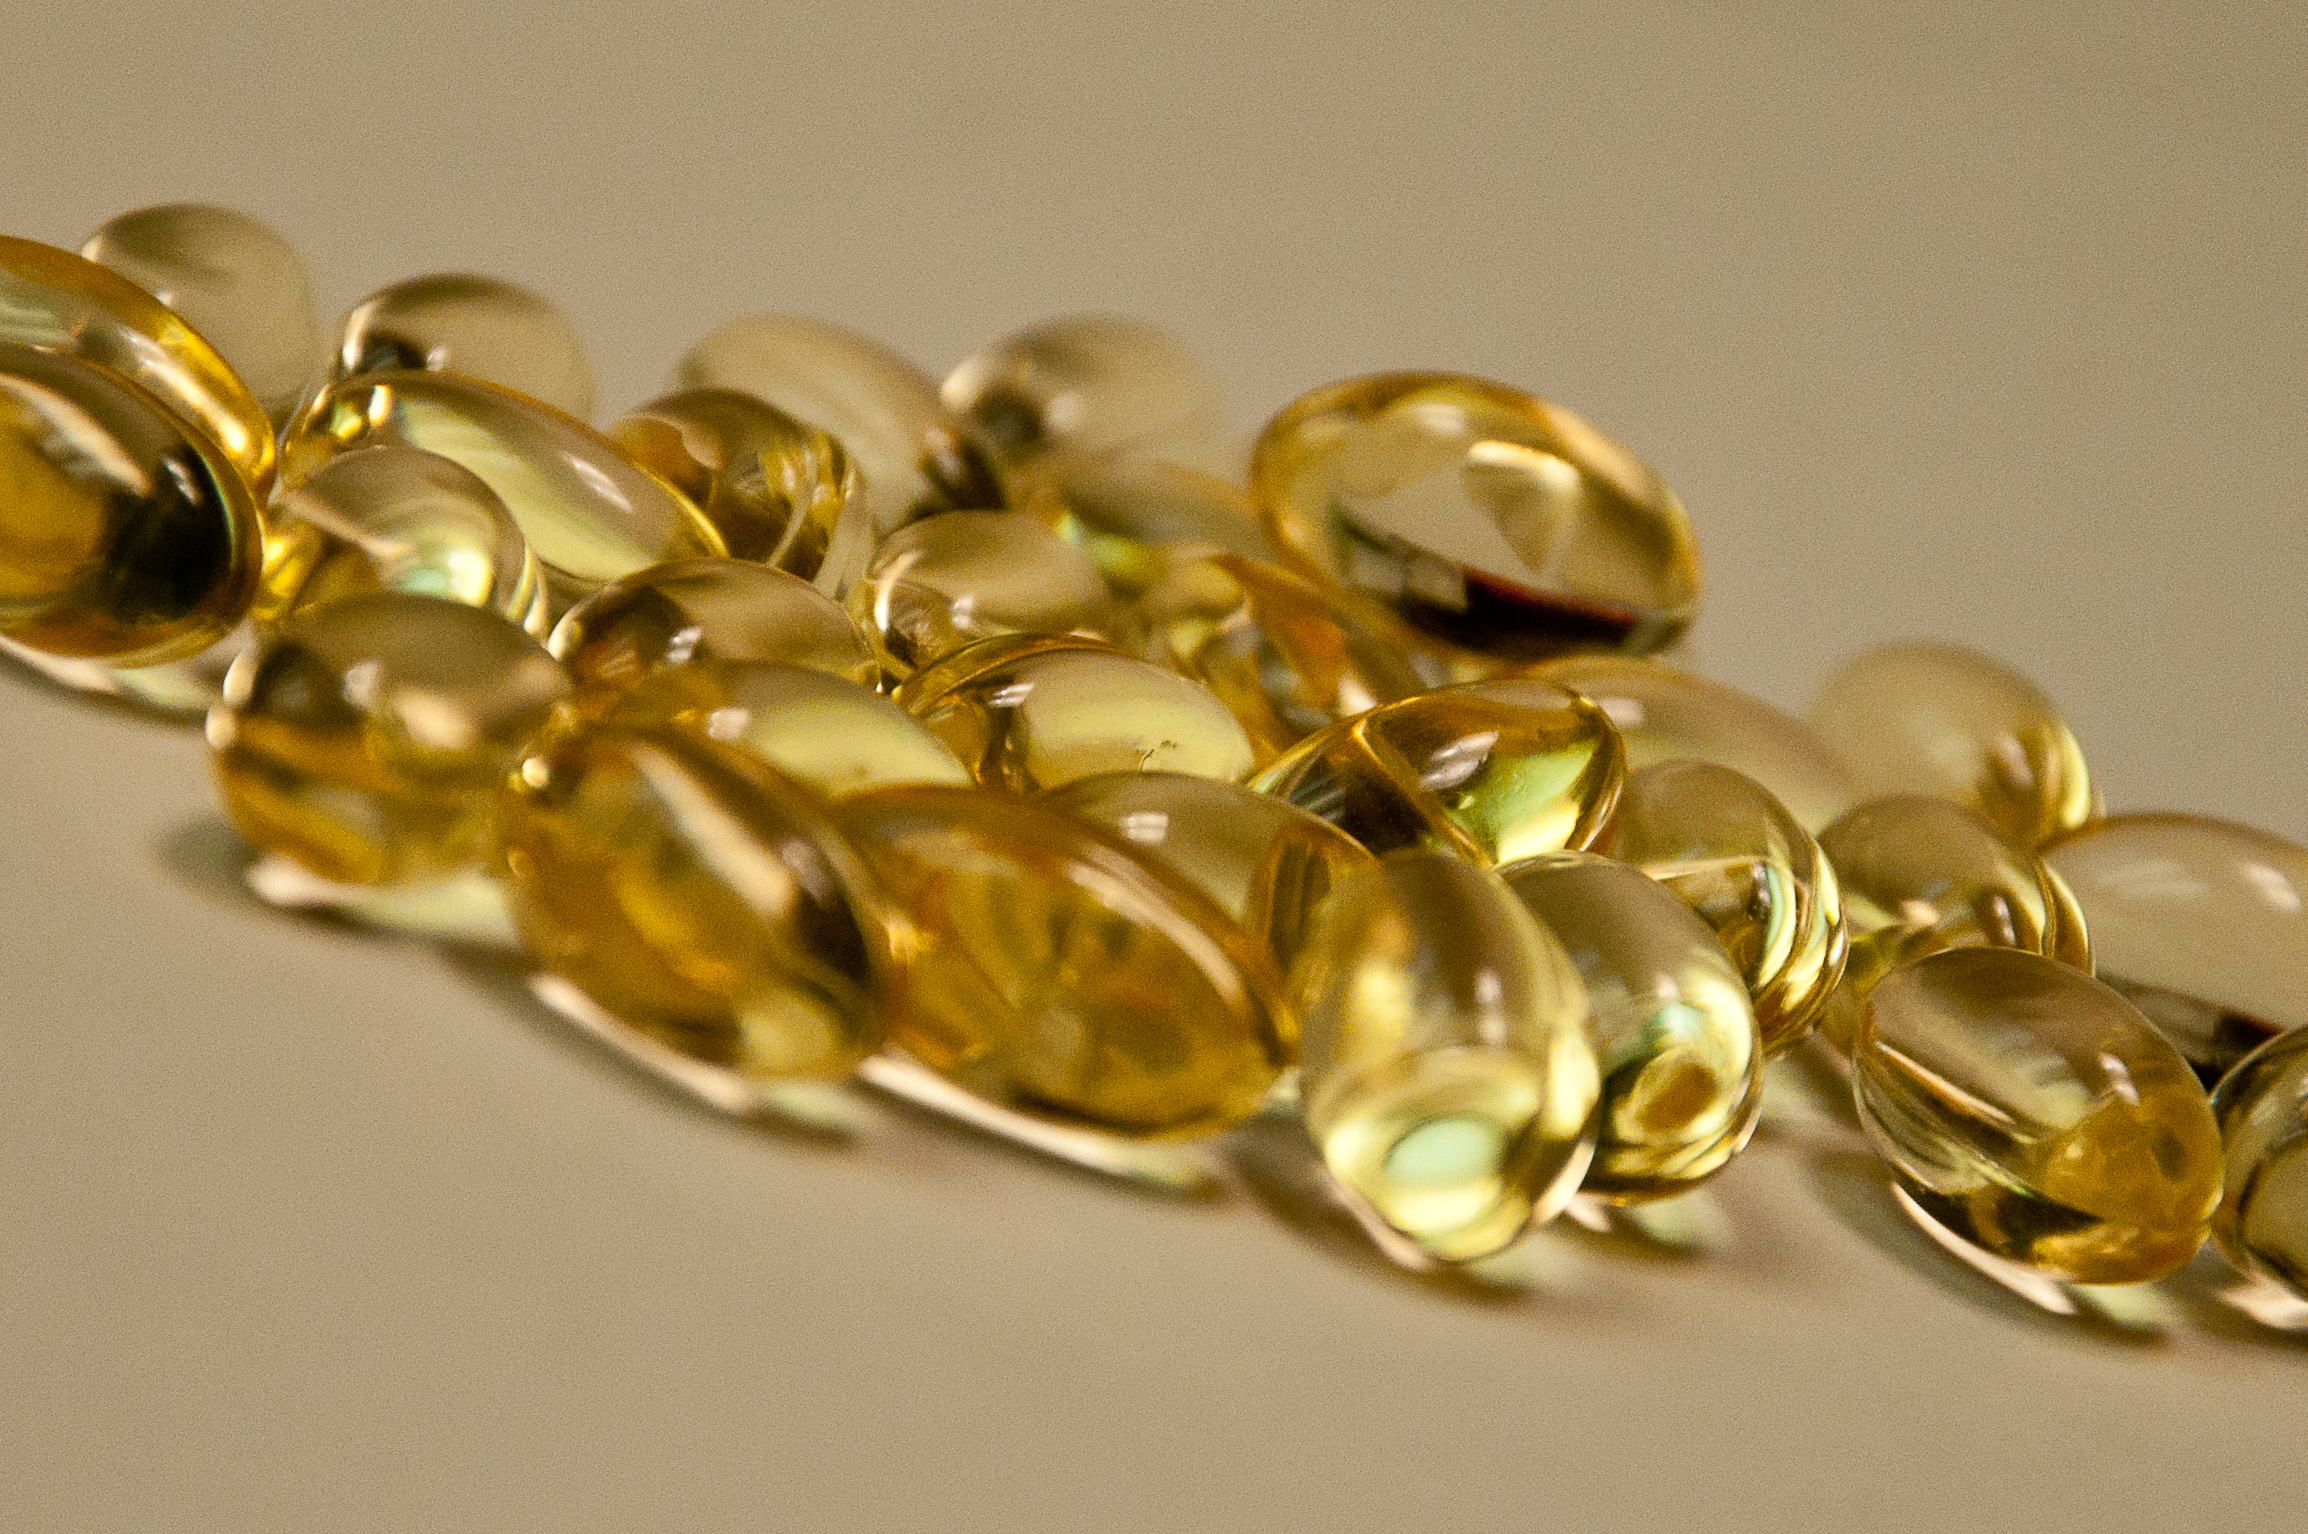 You are currently viewing Vitamin E capsule uses in hindi